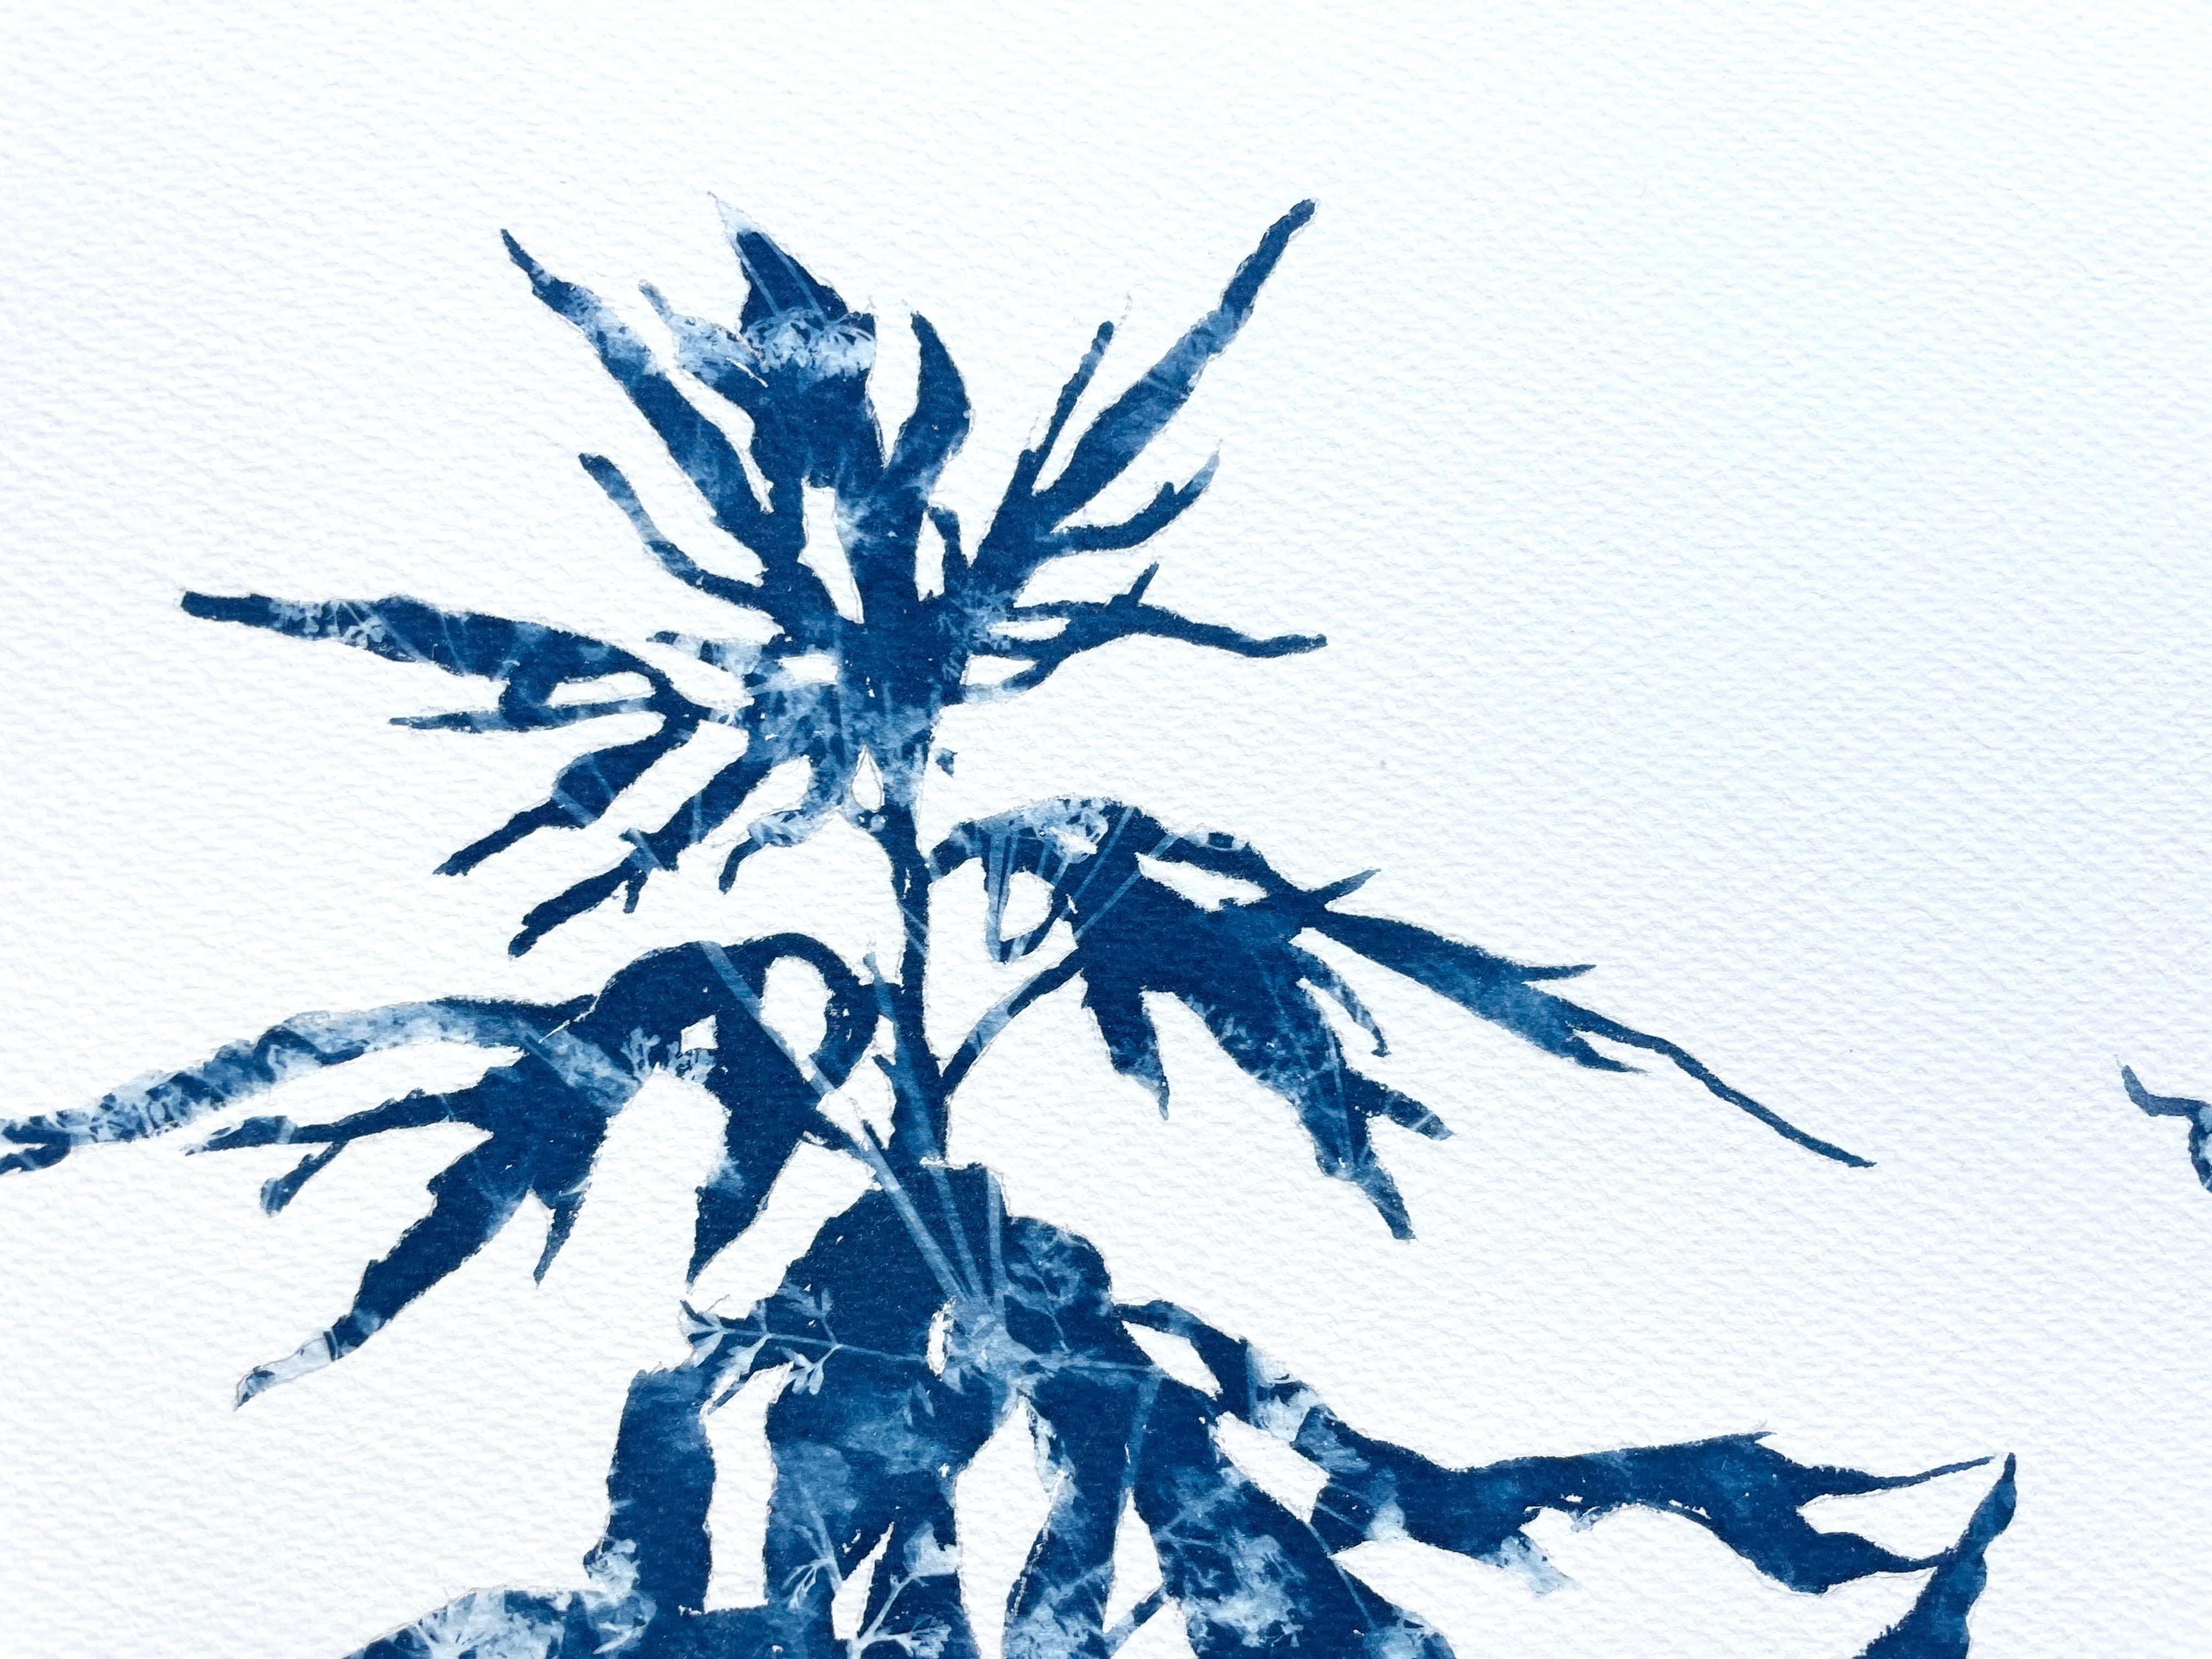 This is a combination of painting and photography, the antique cyanotype process. The silhouette of the plant was first drawn, then painted not with ink or paint, but with light-sensitive photo emulsion. The blue and white pattern seen in each leaf